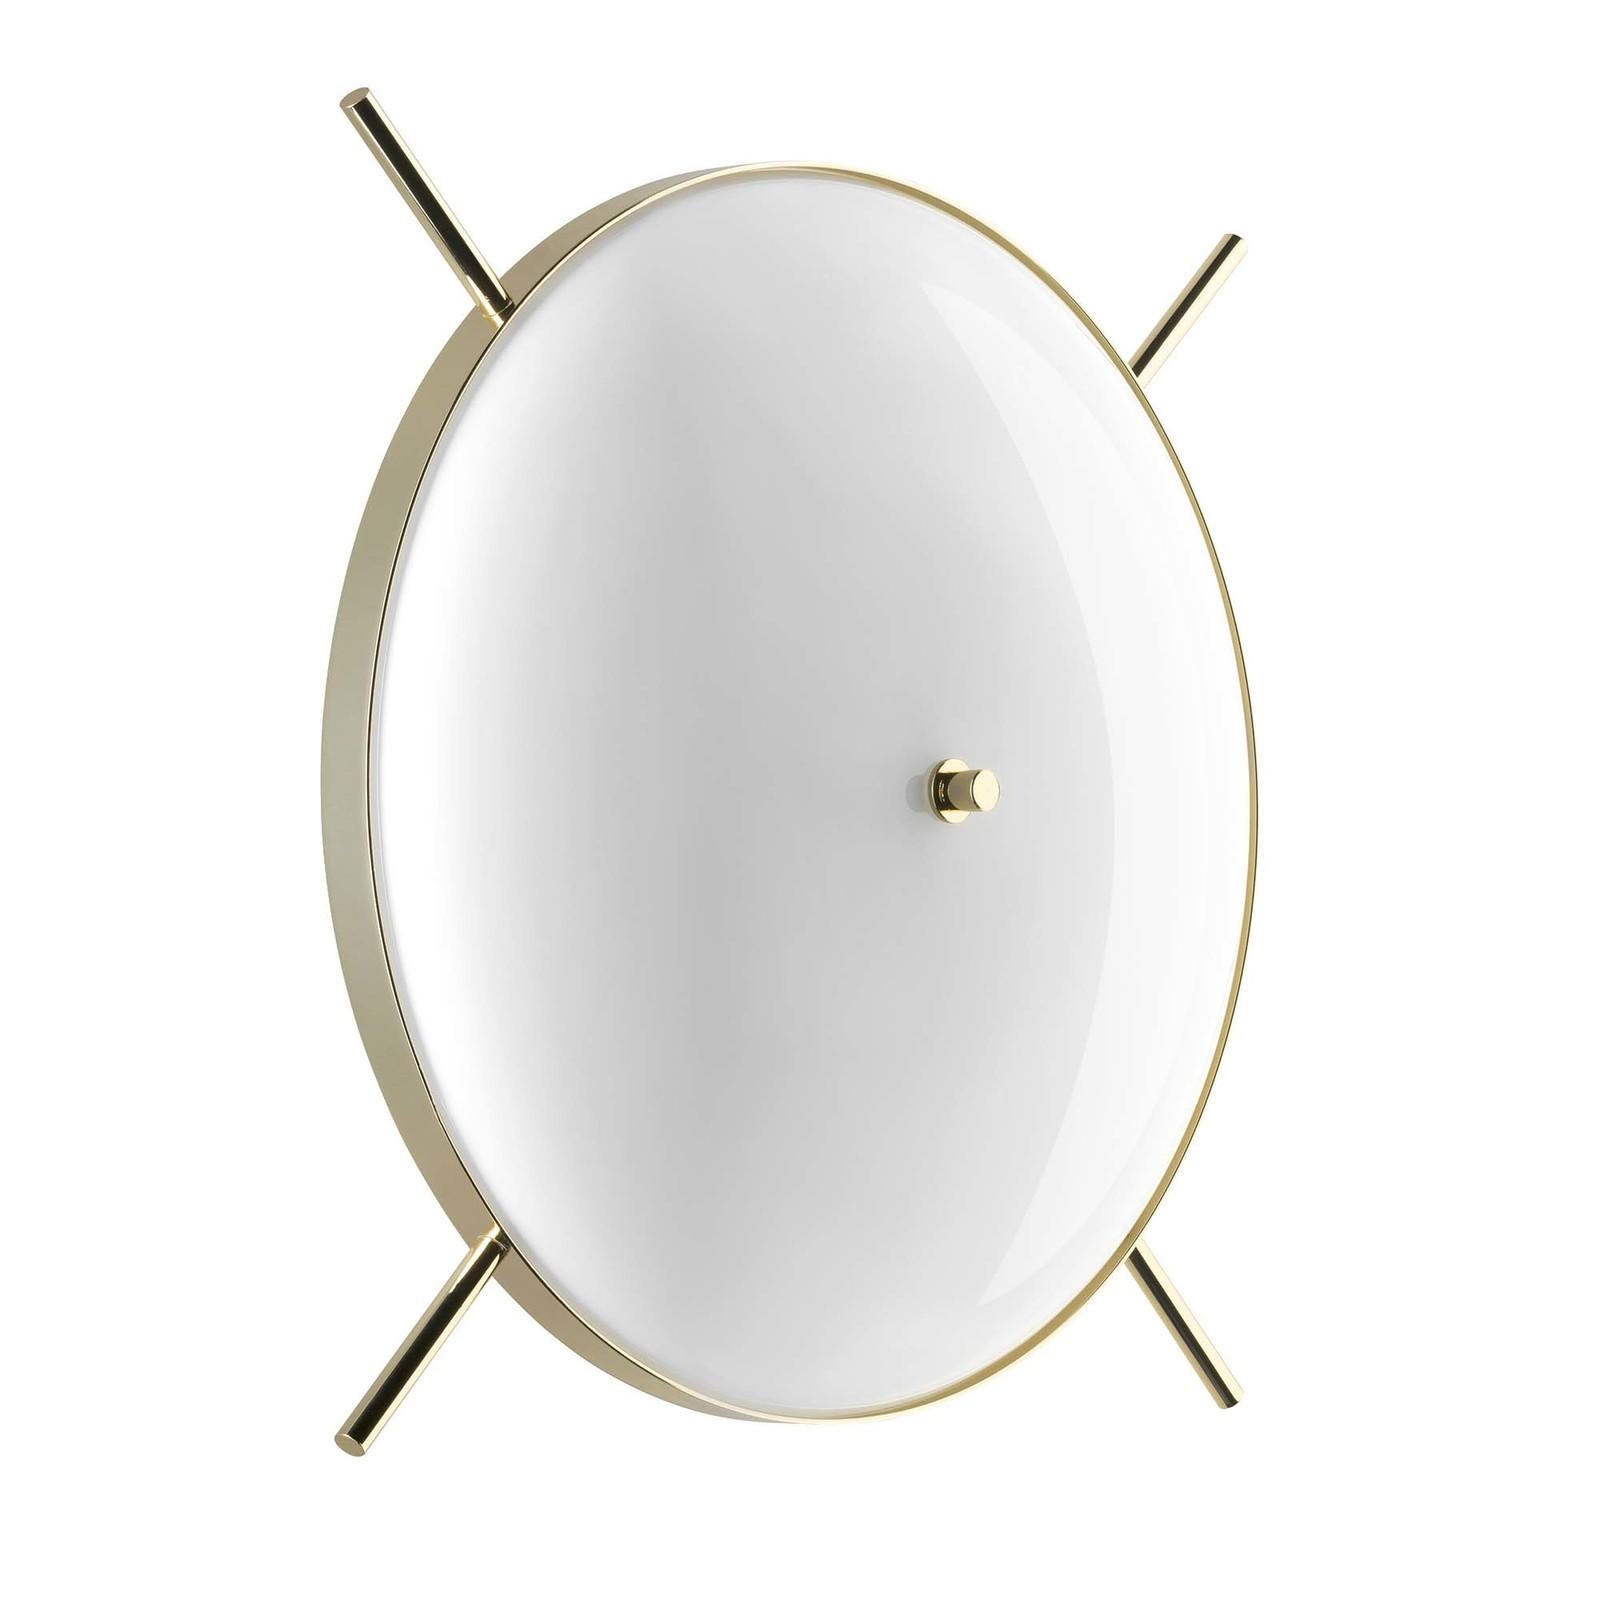 Part of the Home Couture collection and inspired by Art Deco style, this small sconce is a sophisticated and timeless addition to both a Classic and contemporary home. Its structure in brass serves as mounting for the mouth-blown Murano glass shade